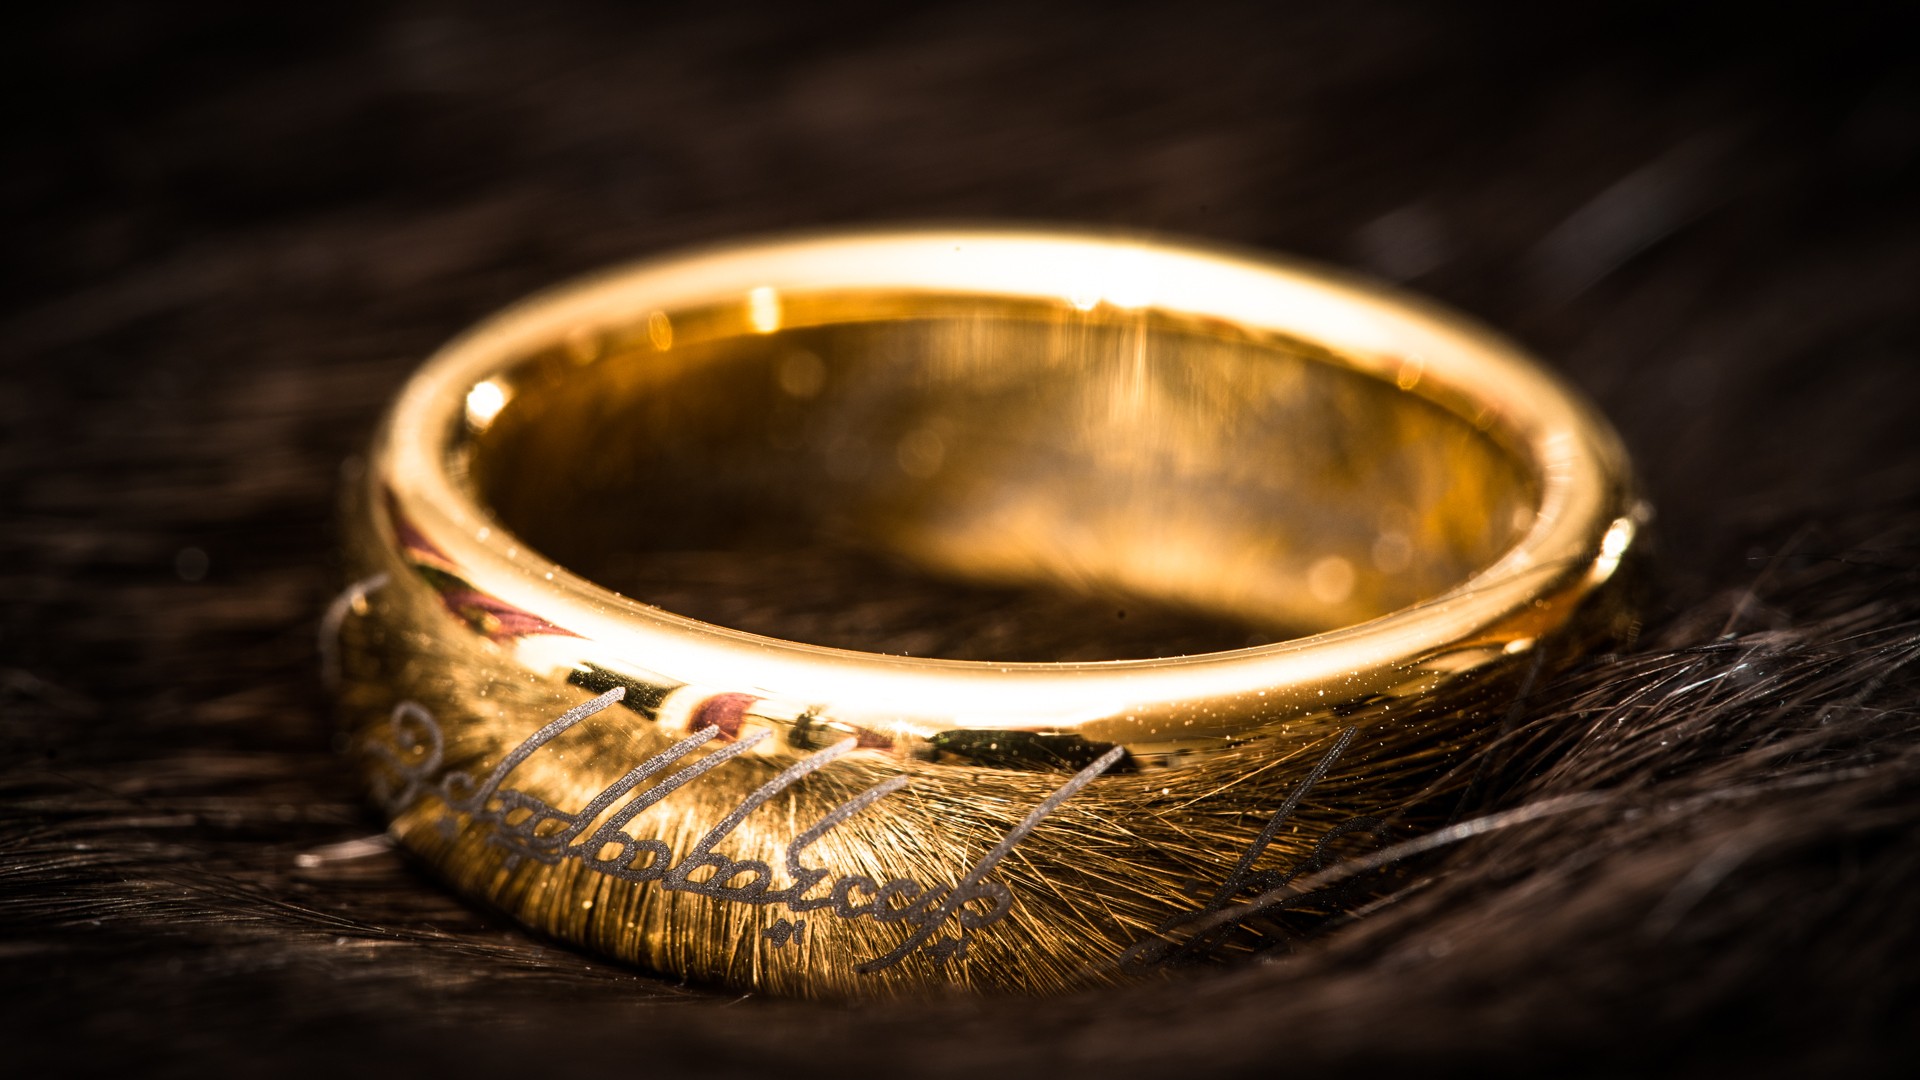 One Ring To Rule Them All Wallpapers